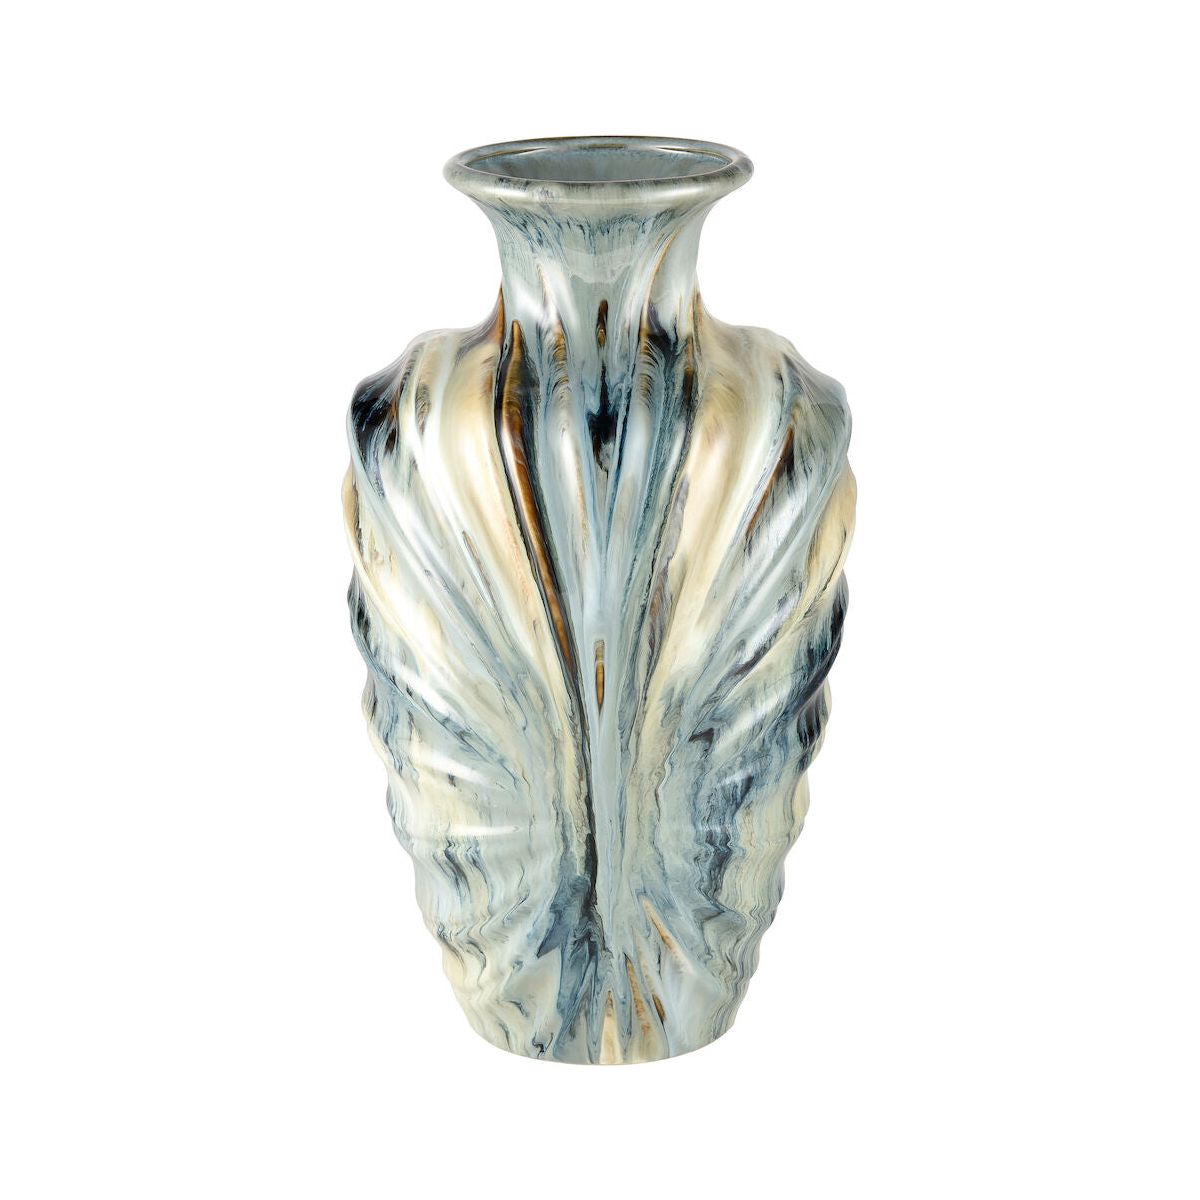 A tall, intricately designed Earthenware Vase with a glossy finish and distressed reactive glaze. It has a textured pattern resembling gently swirling drapery in shades of blue, cream, and grey. The rim is slightly flared, adding elegance to its overall shape and infusing it with rustic charm.

(Note: It seems the product name "Earthenware Vase" is already present in the sentence. No changes were needed.)